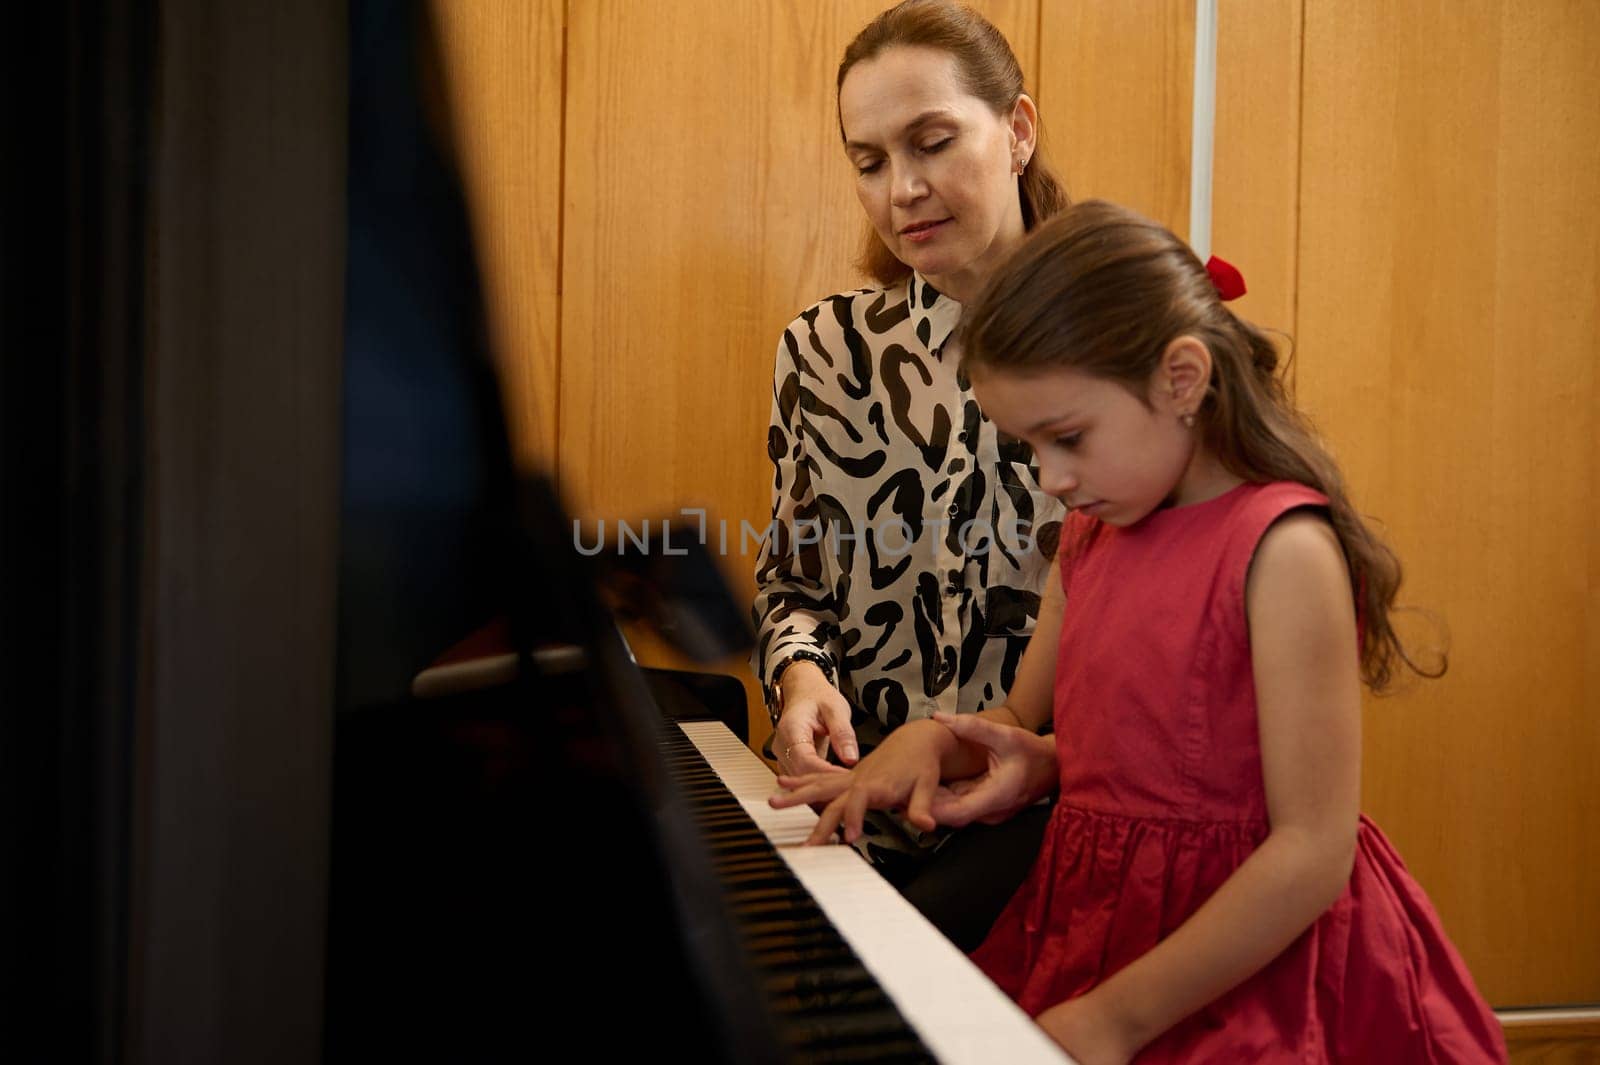 Adorable little girl in red dress, taking piano lesson, passionately playing the keys under her teacher's guidance, feeling the rhythm of music. Musical education and talent development in progress by artgf